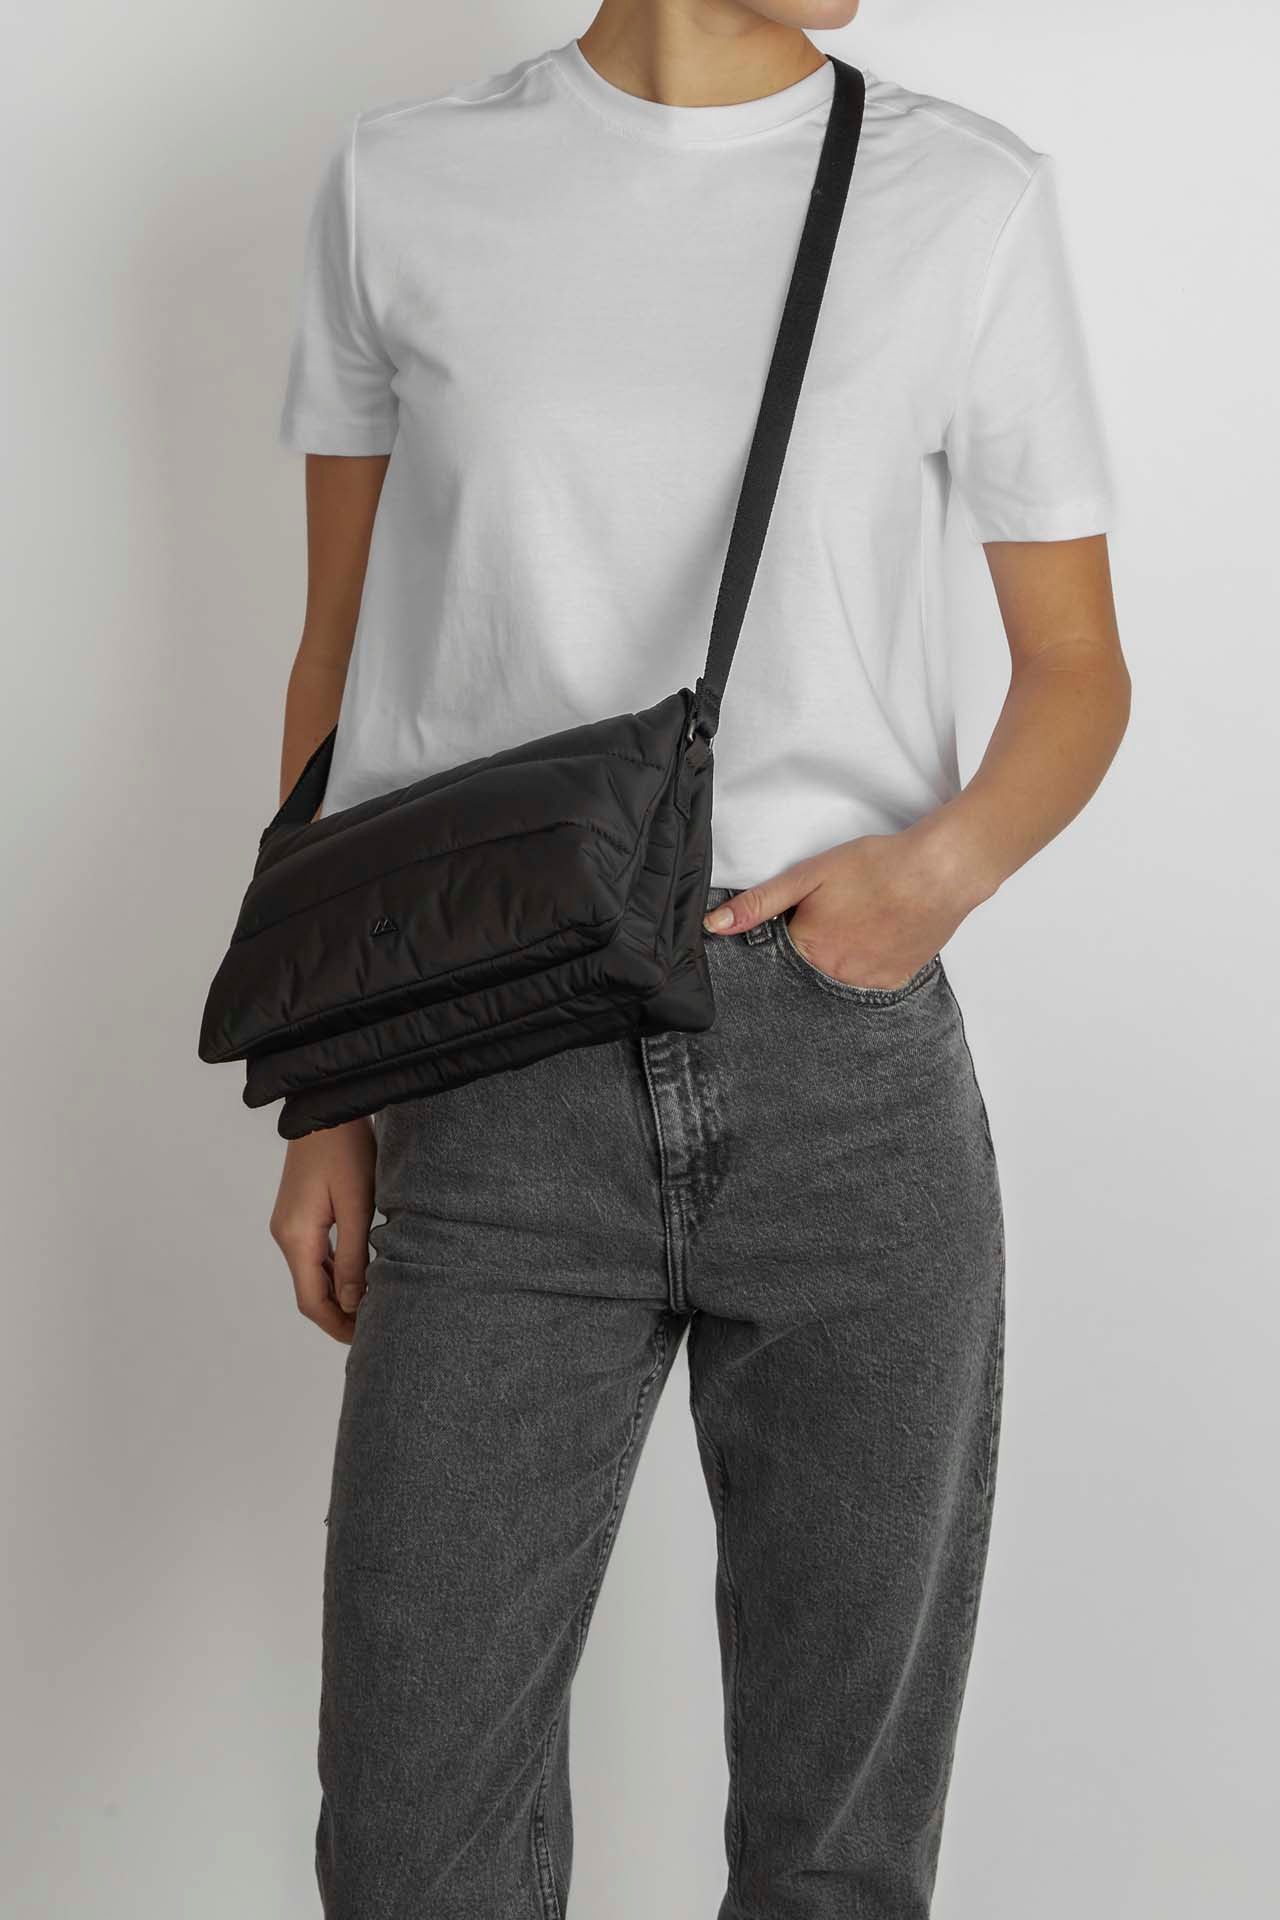 Person wearing a white t-shirt and gray jeans with a black Markberg Enea Crossbody Bag made from recycled plastic bottles.